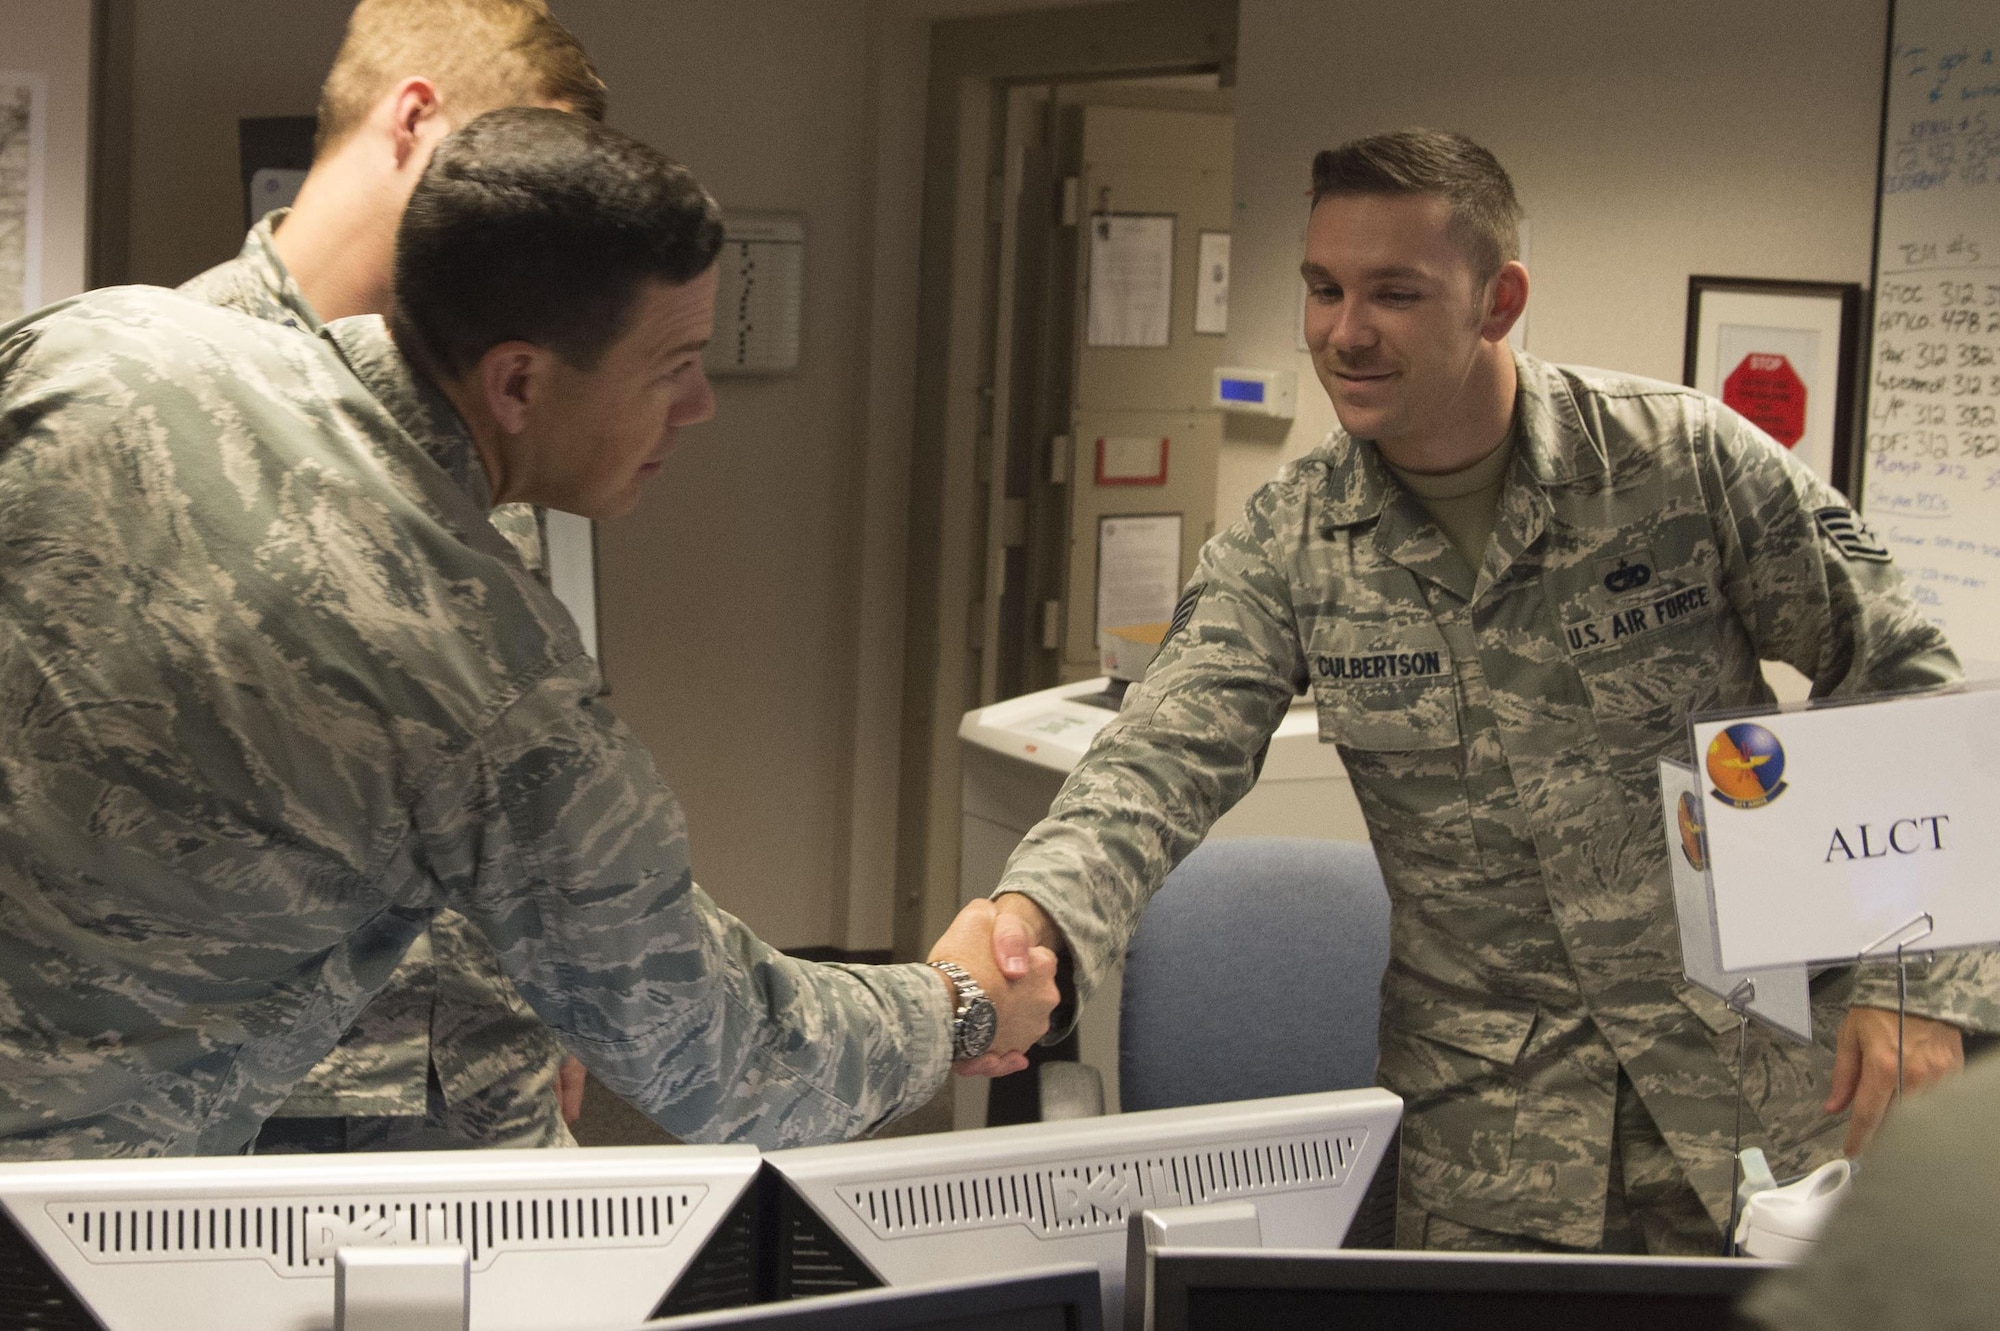 Brig. Gen. Stephen W. Oliver, U.S. Air Force Expeditionary Center vice commander, shakes the hand of Staff Sgt.Talon Culbertson, during a tour of the 621st Air Mobility Operations Squadron during their participation in Exercise Mobility Guardian at Joint Base McGuire-Dix-Lakehurst, N.J., August 1, 2017. The exercise is designed to enhance the capabilities of AMC Airmen by preparing them to succeed in the dynamic threat environments. (U.S. Air Force photo by Tech. Sgt. Gustavo Gonzalez/RELEASED)